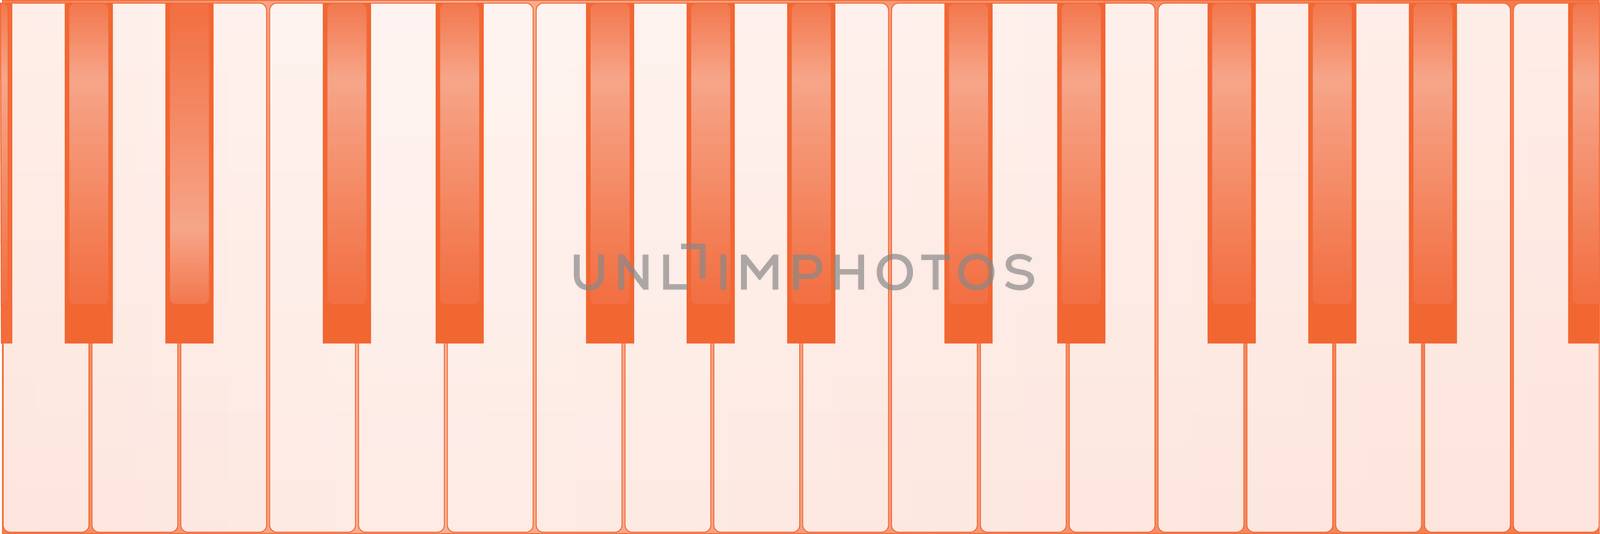 Several piano keys set as a background